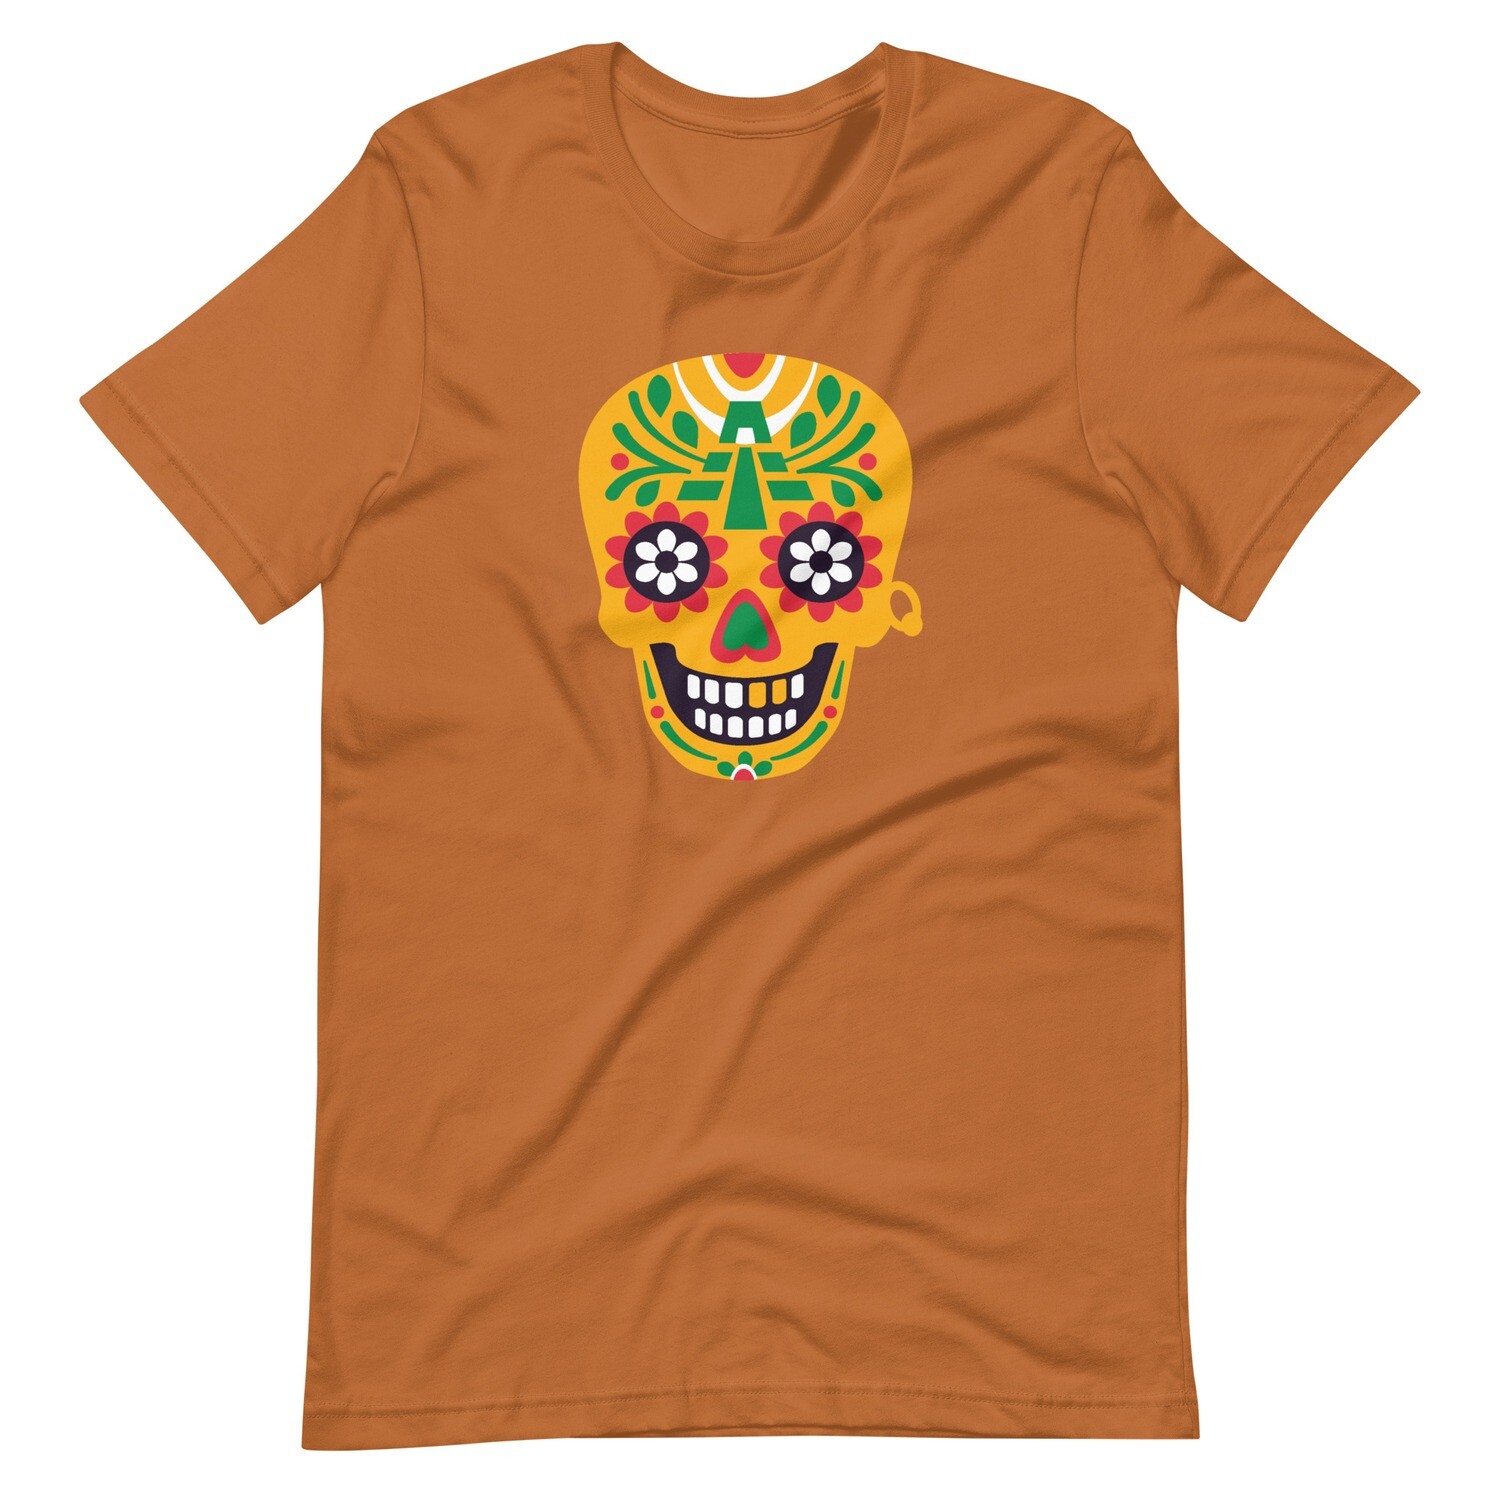 Day of The Dead Mexican skull t-shirt